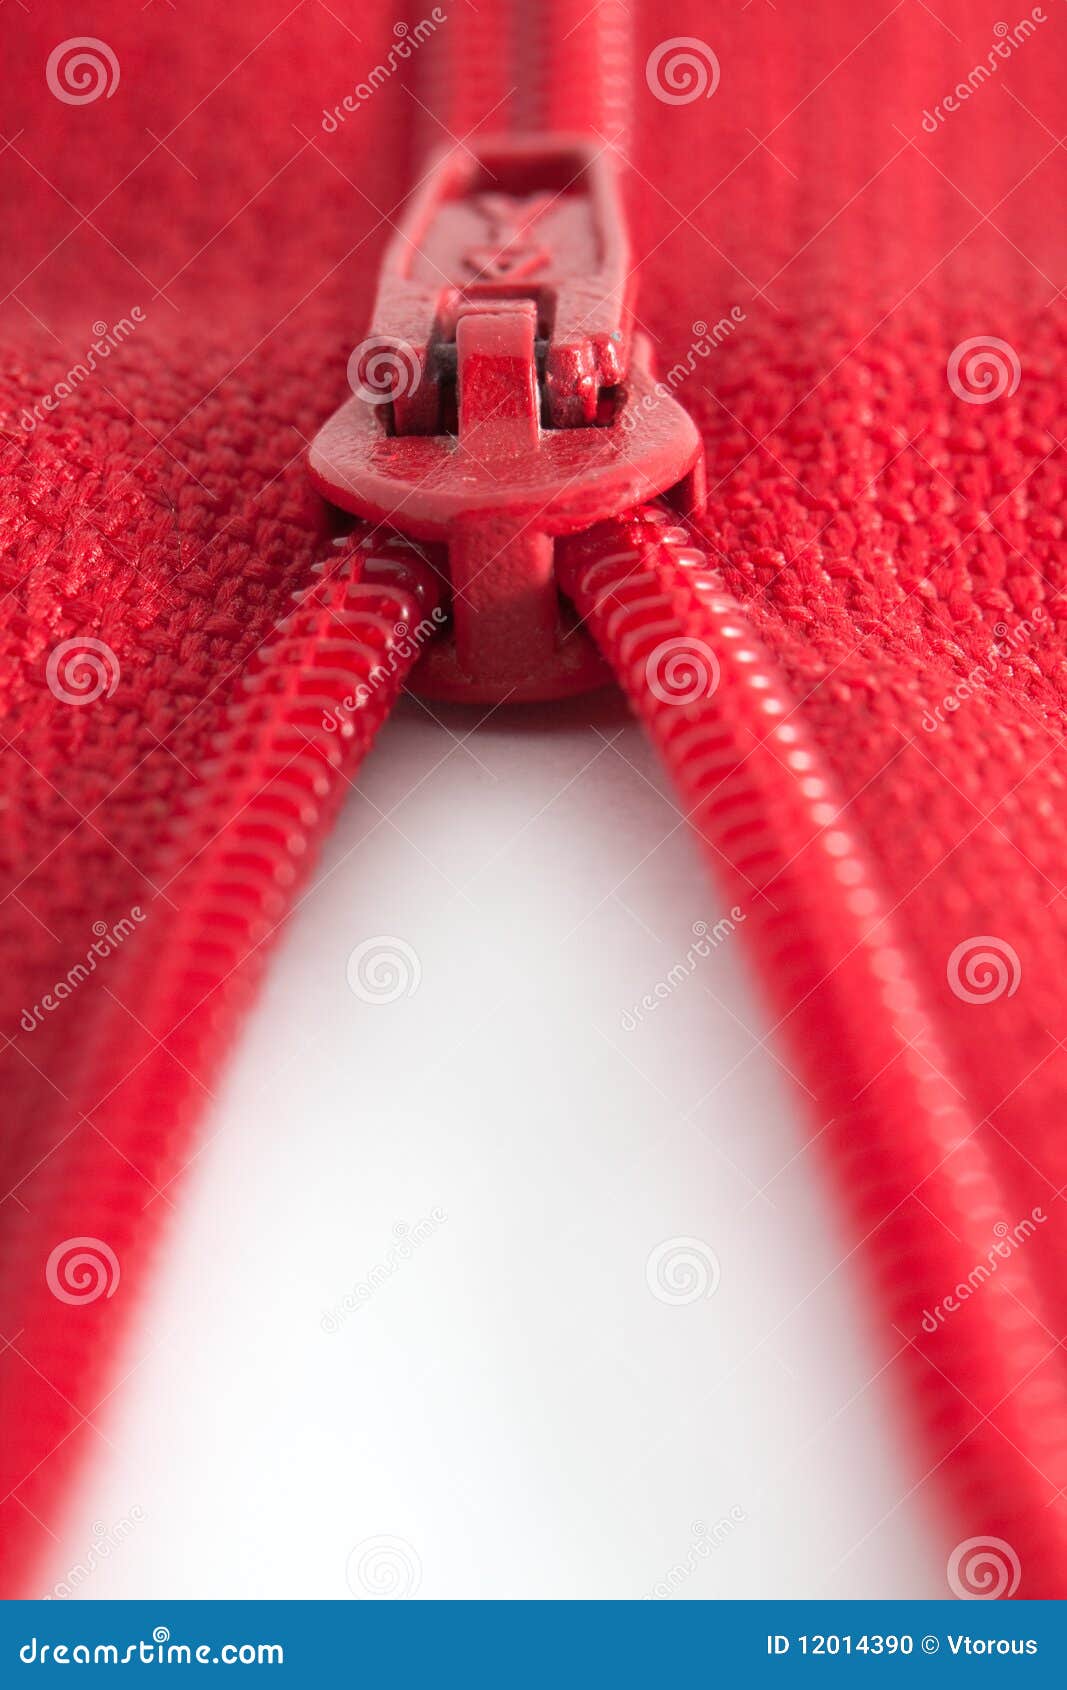 Open red zipper stock photo. Image of fastener, apparel - 12014390